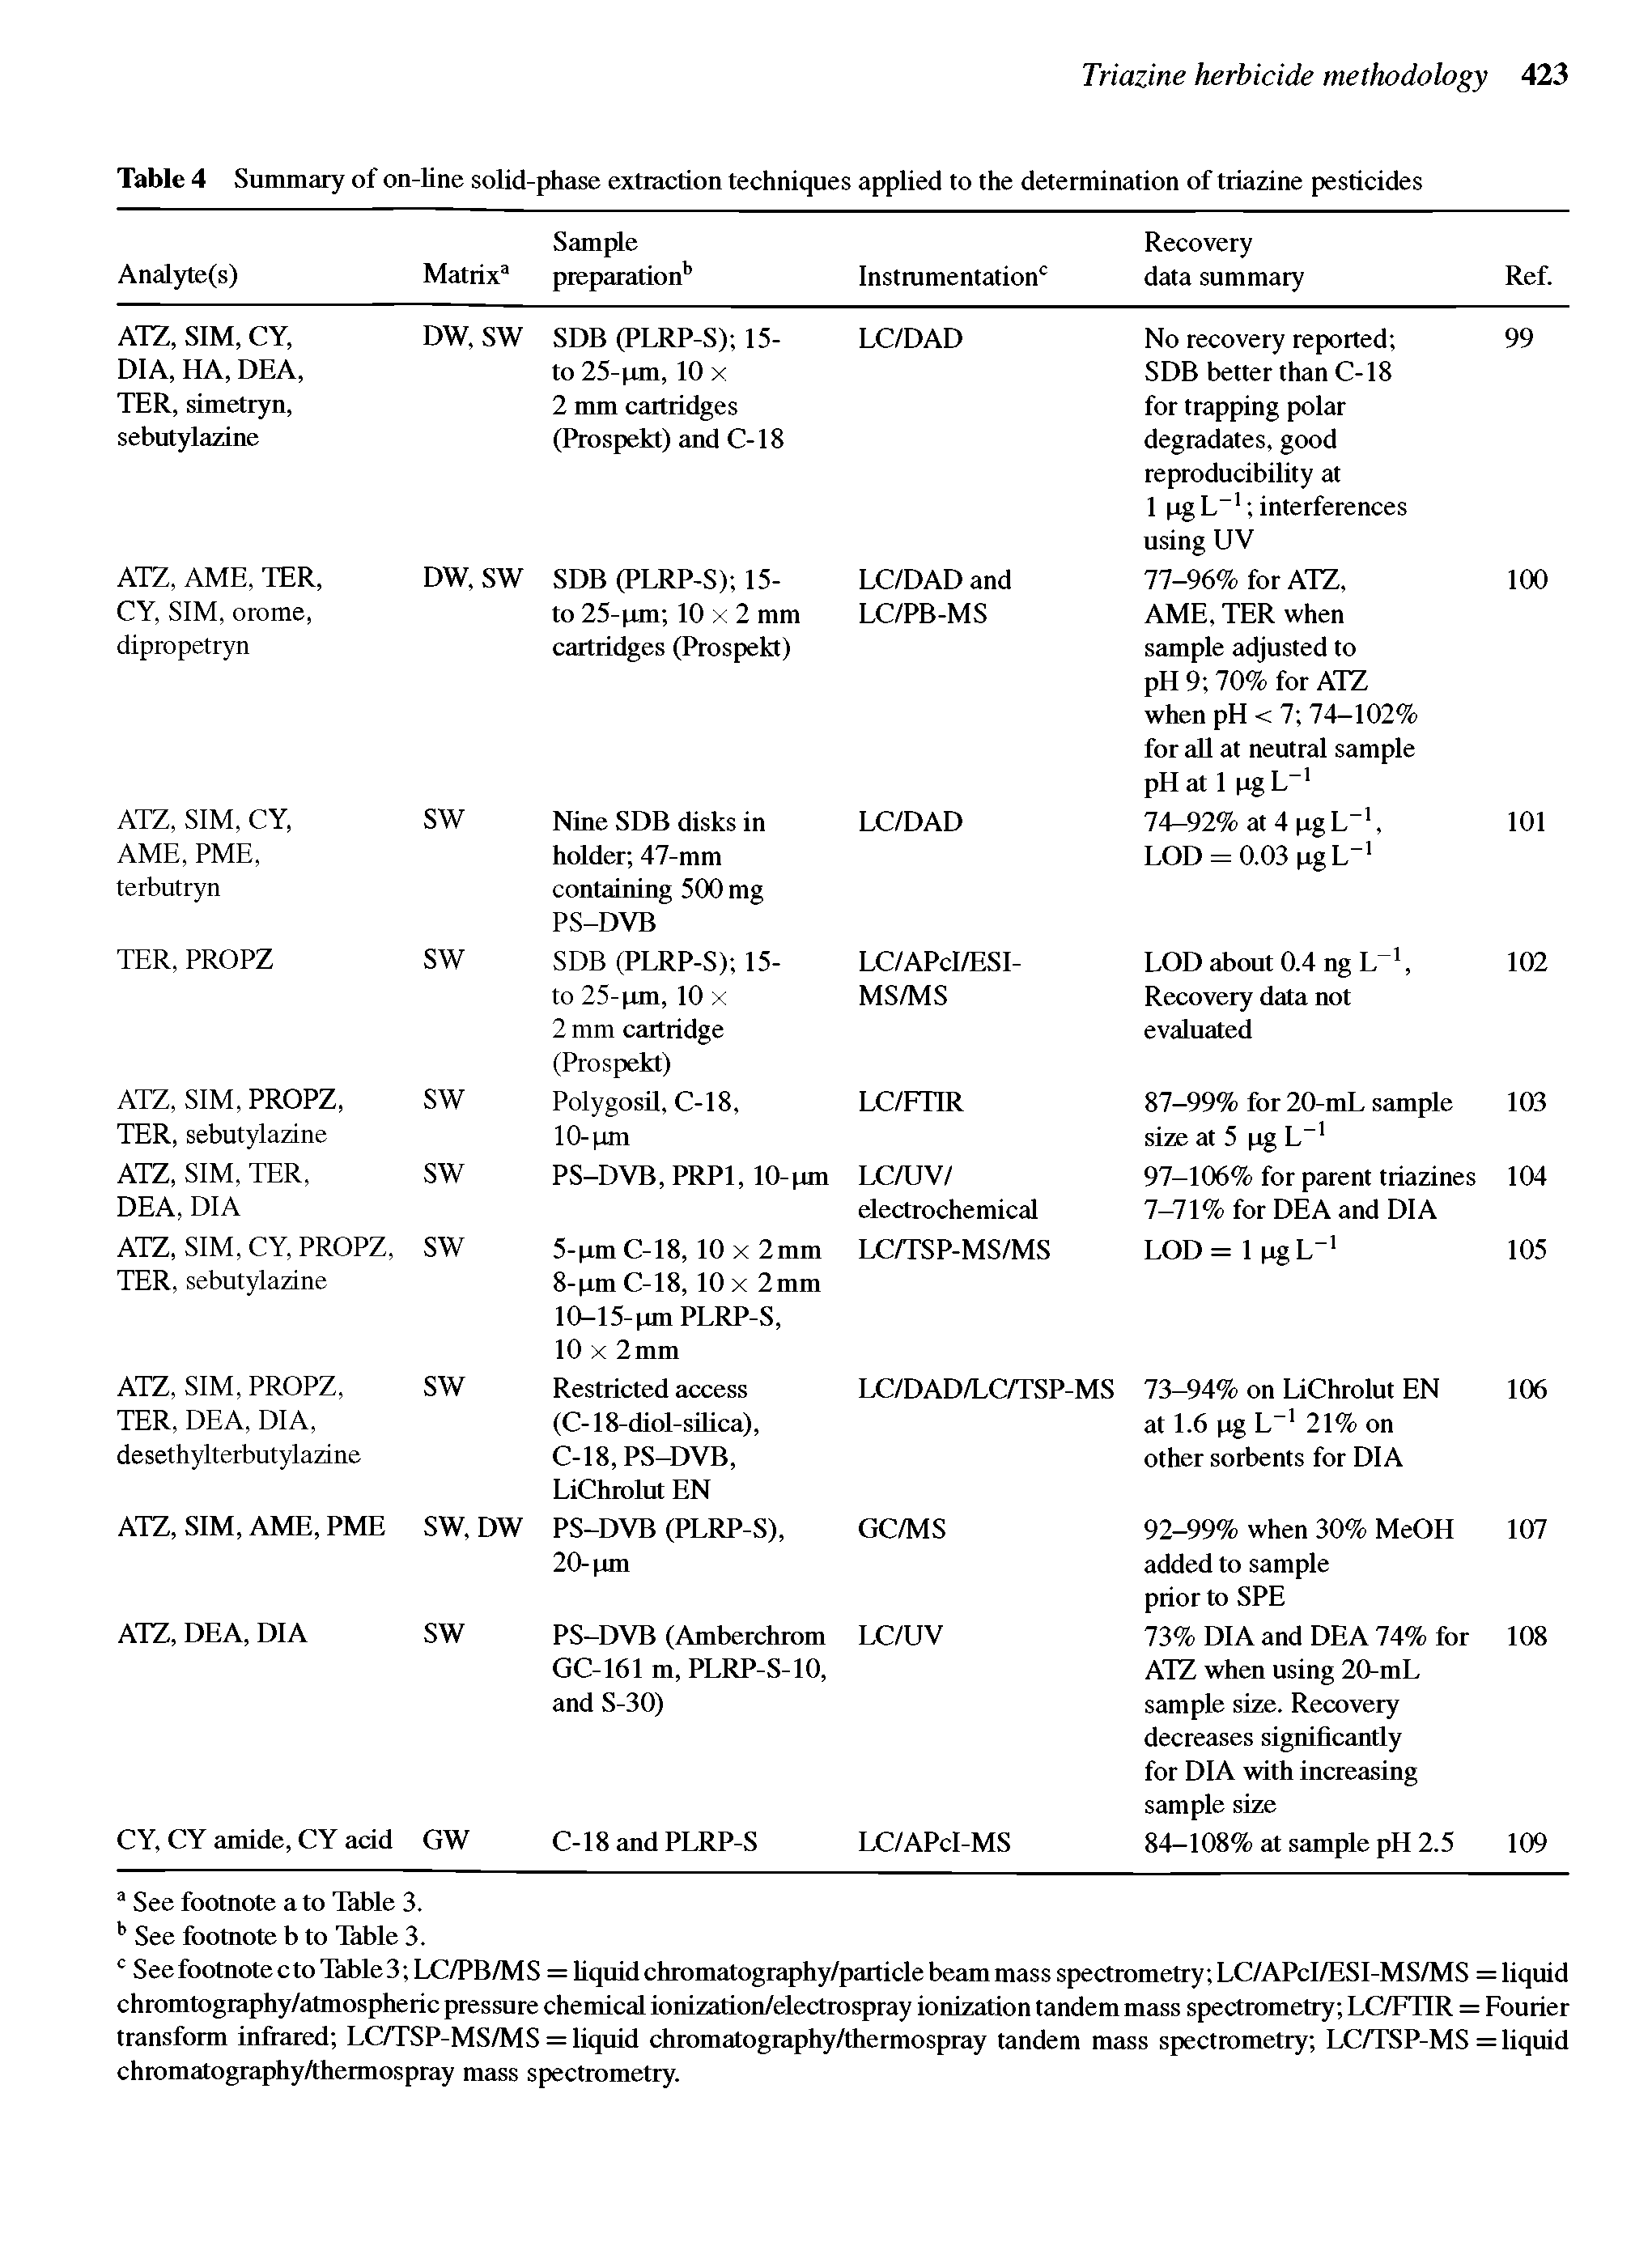 Table 4 Summary of on-line solid-phase extraction techniques applied to the determination of triazine pesticides...